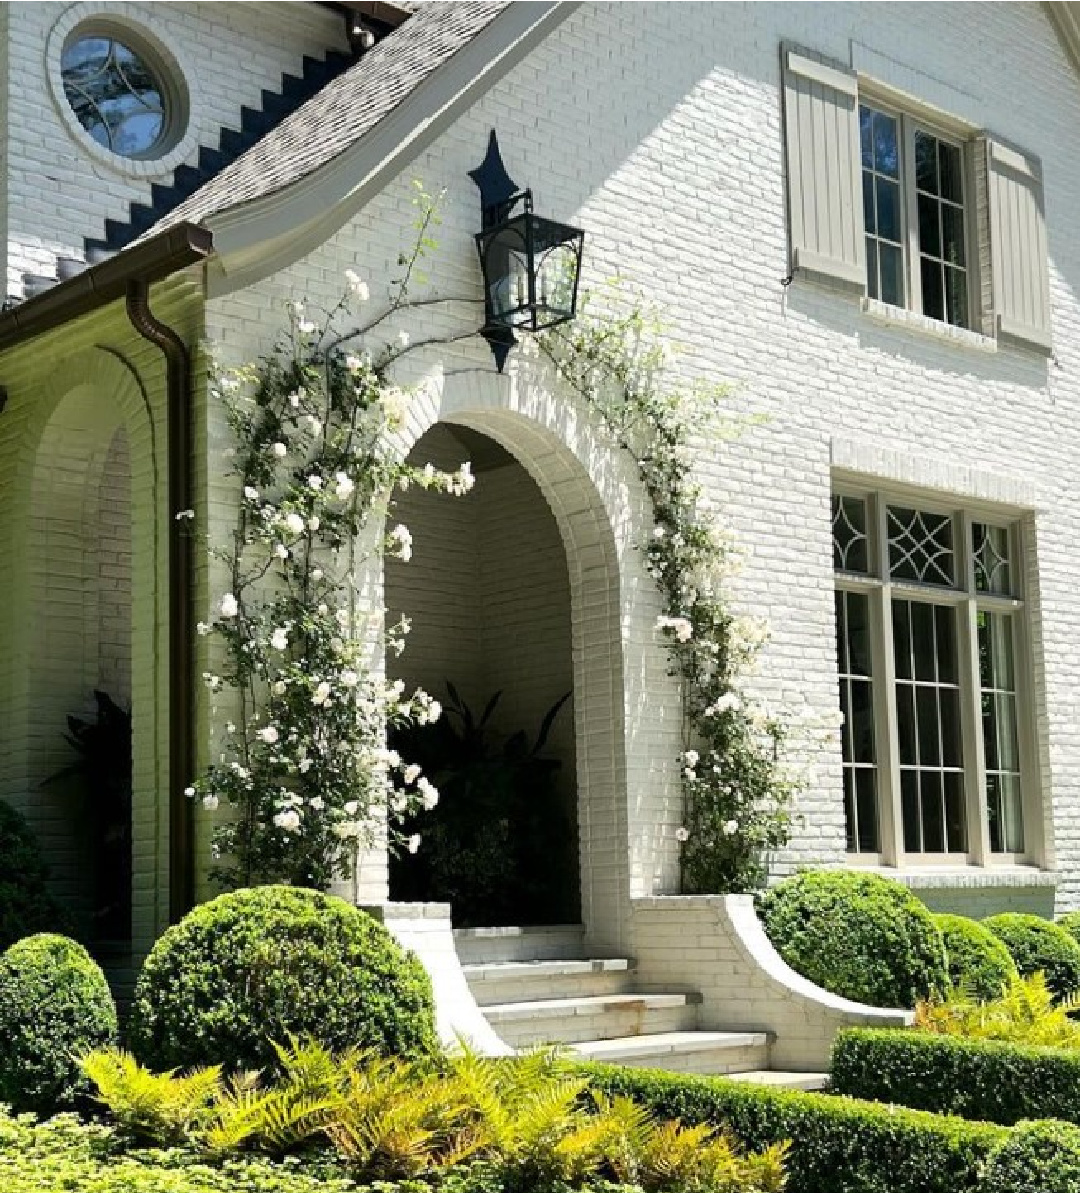 Balboa Mist 1549 painted house exterior. Breathtaking storybook charm of a Tudor style white painted brick home renovated by @ladisicfinehomes with arched entrance softened by creeping vines - photo by Sherry Hart.